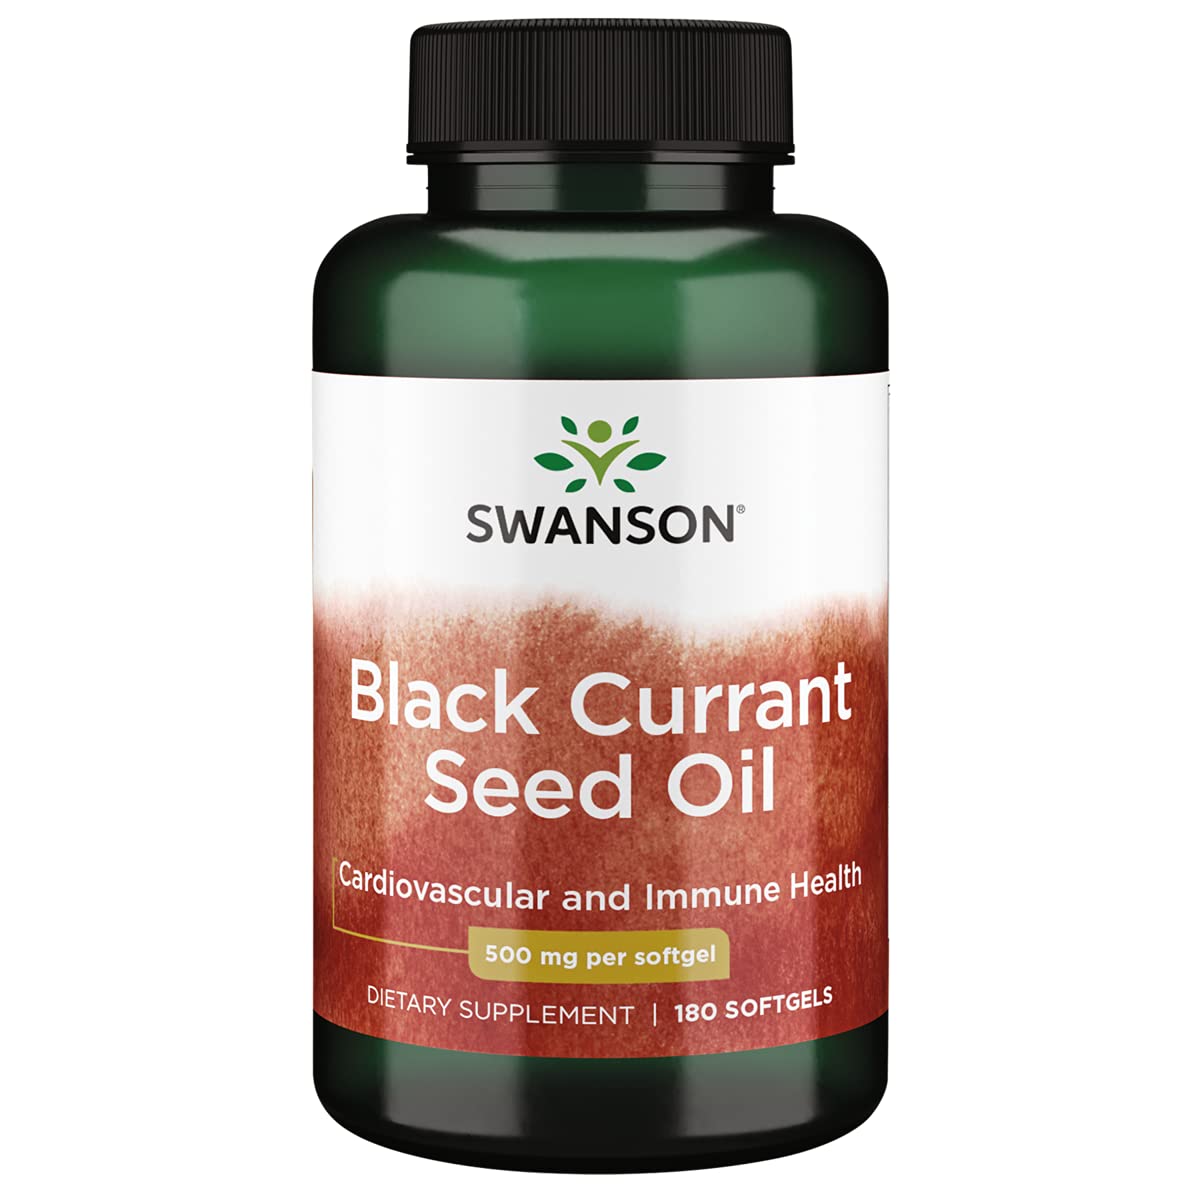 Black Currant Seed Oil Swanson